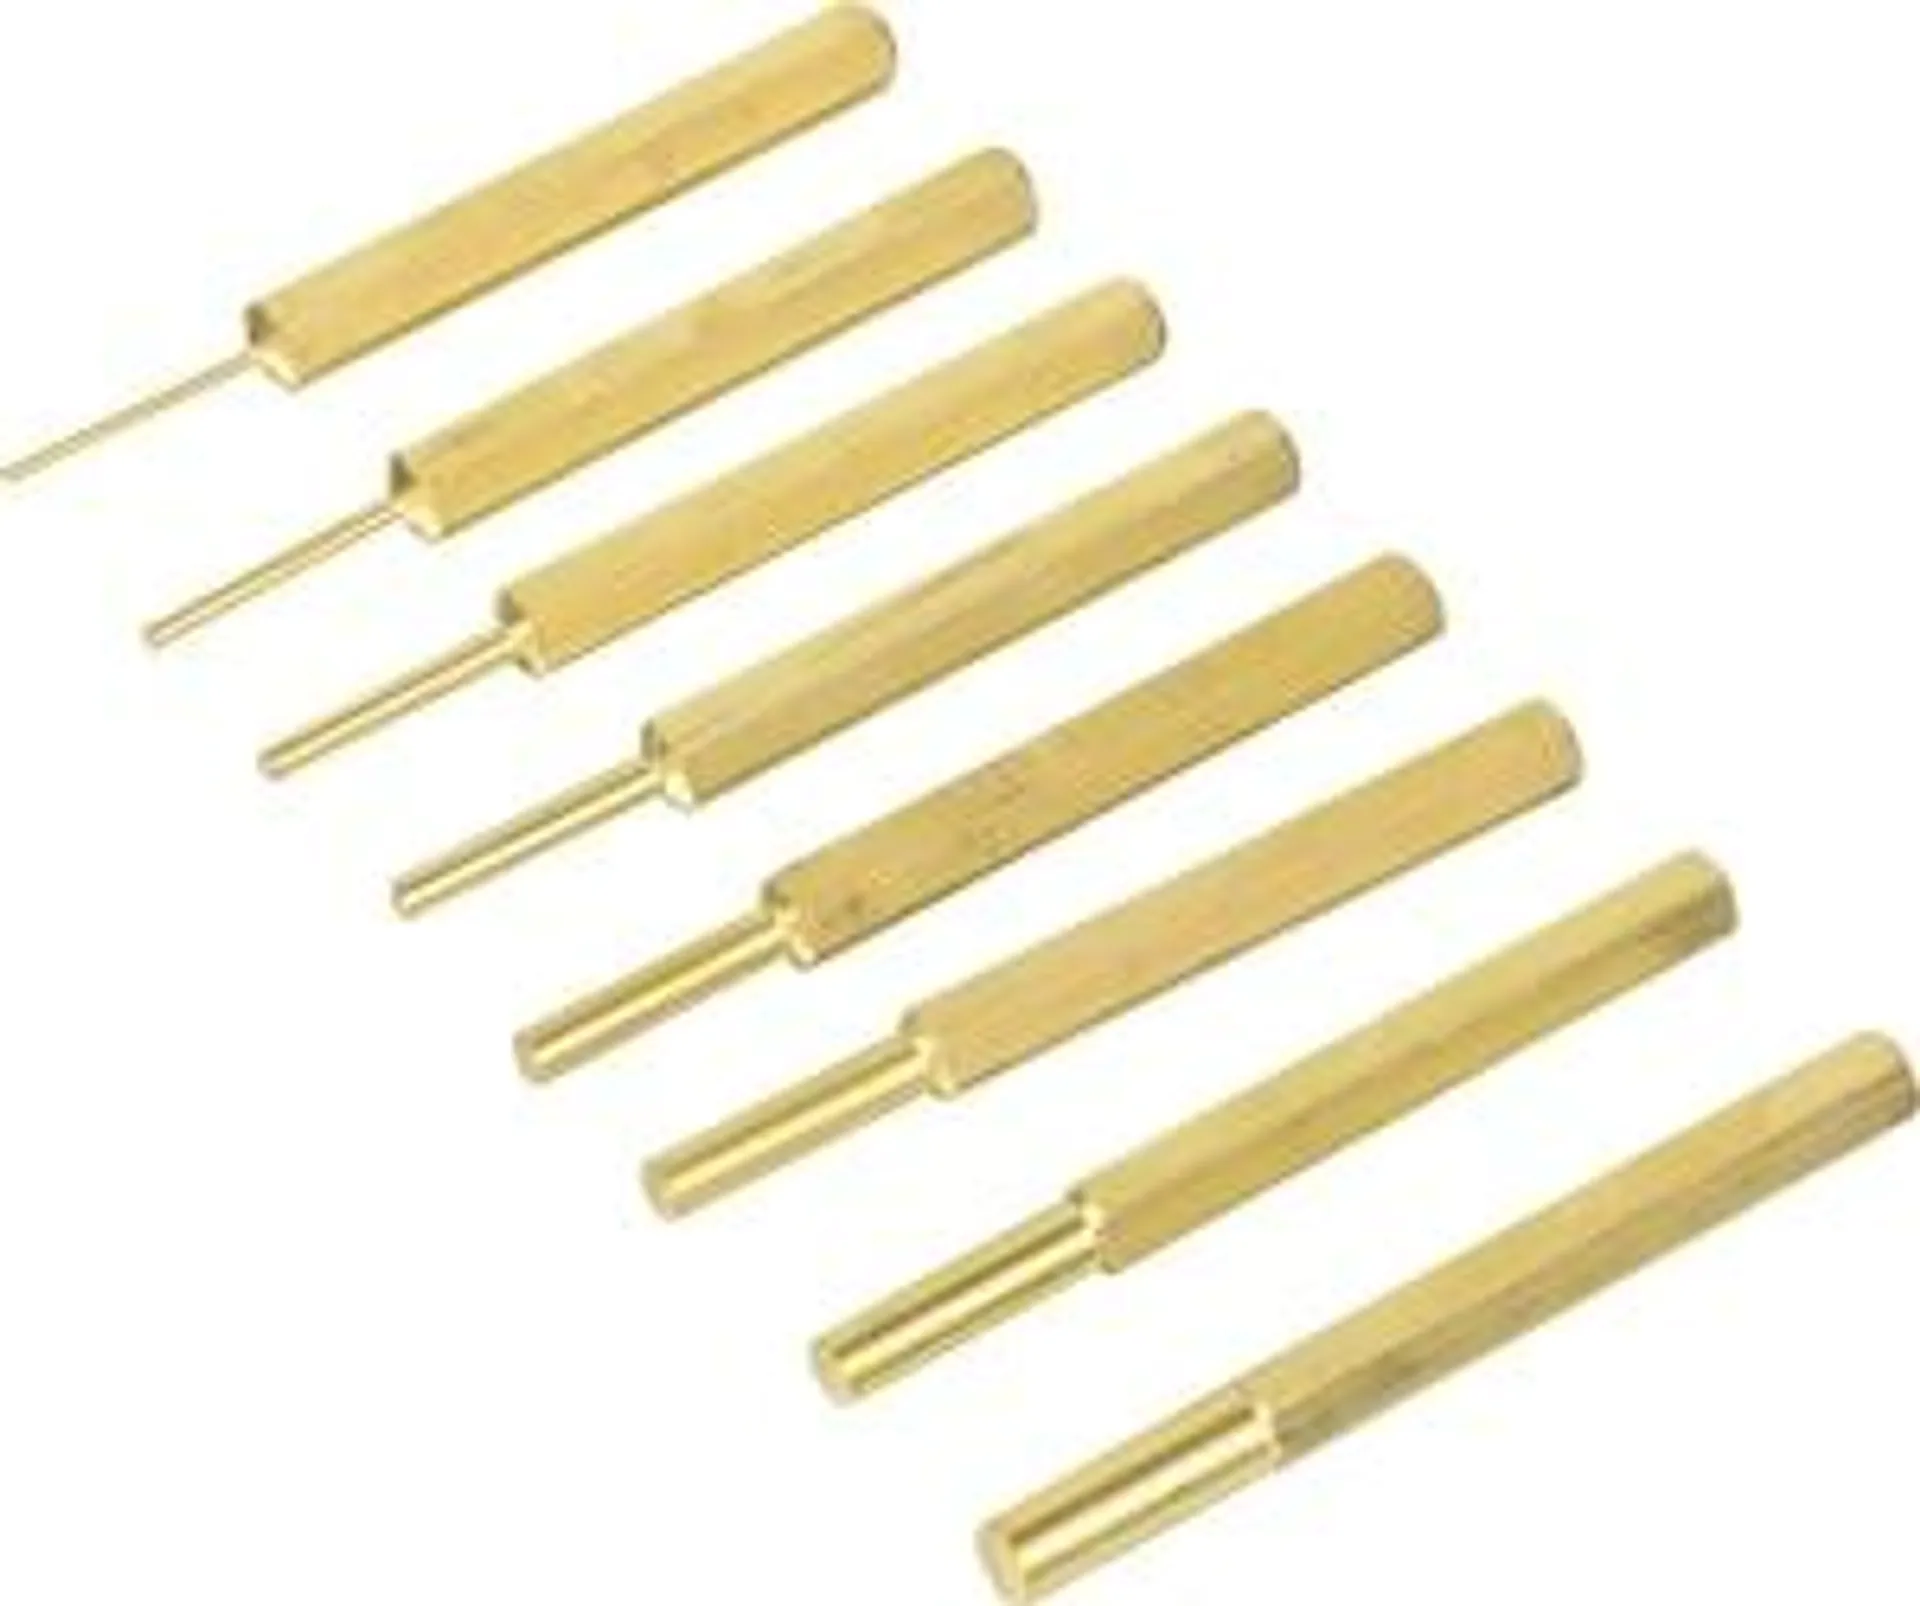 8 pc Solid Brass Pin Punch Set